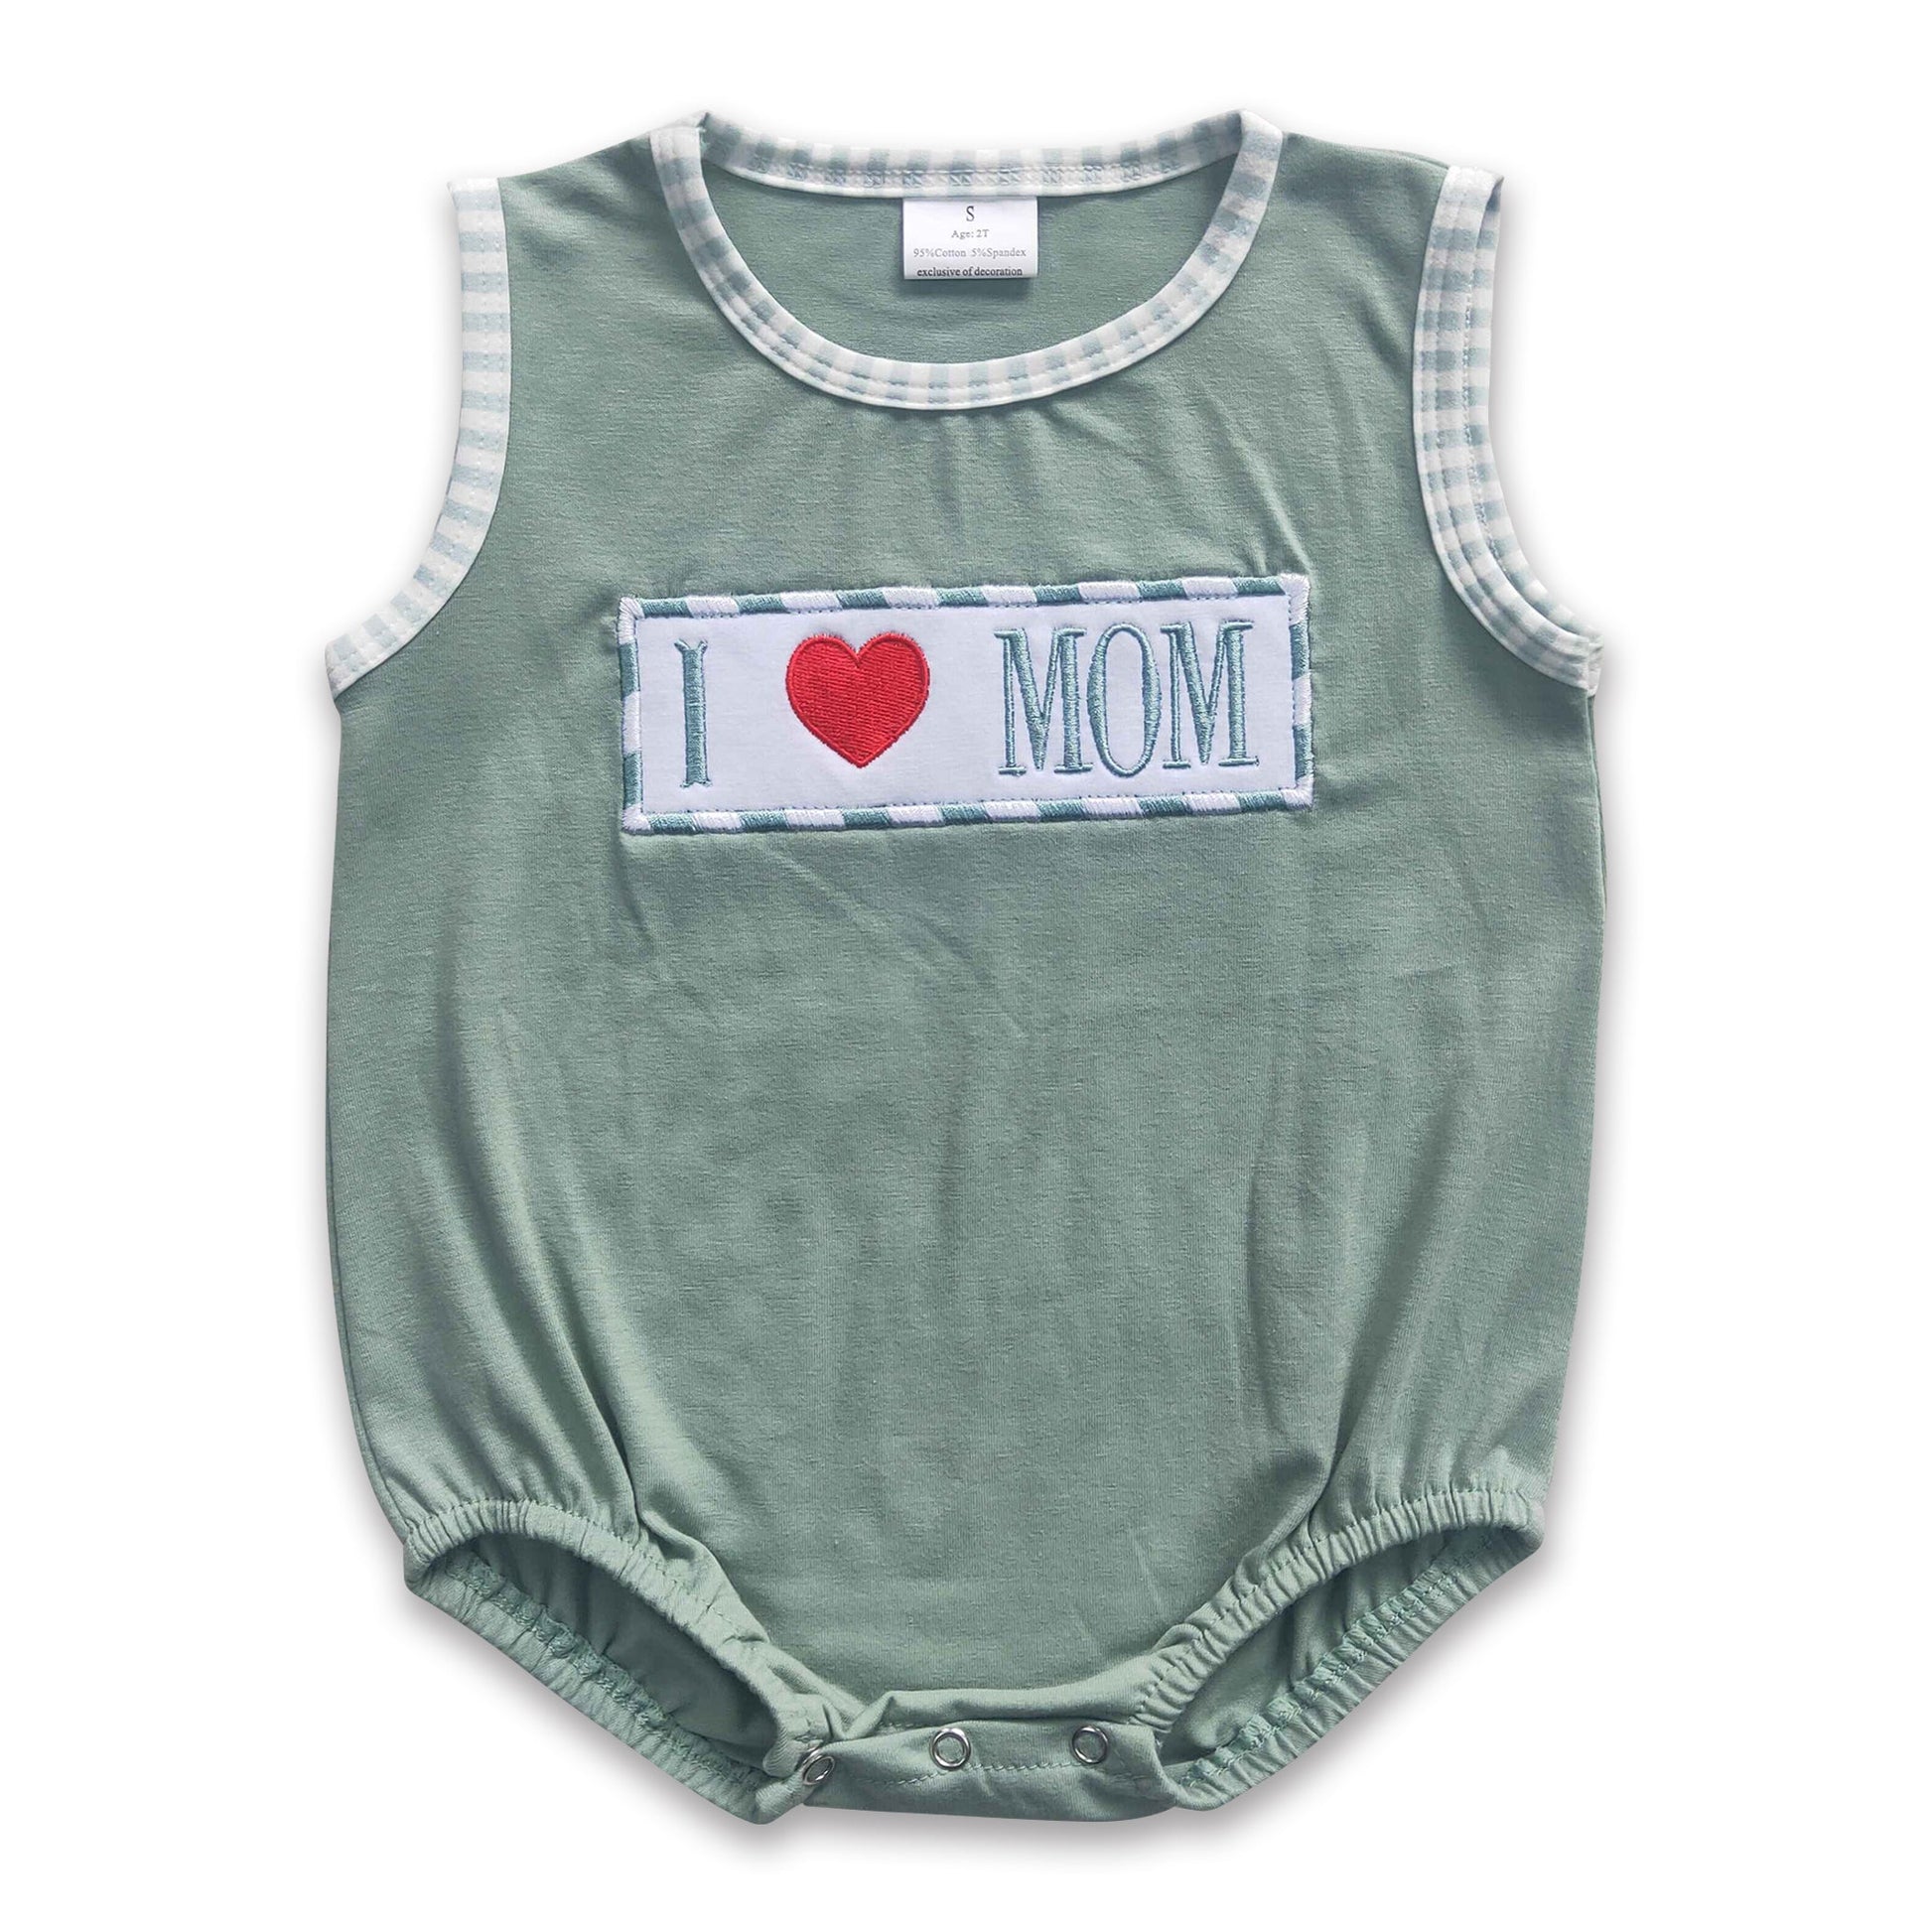 For Mom (or Like a Mom). - The Stripe